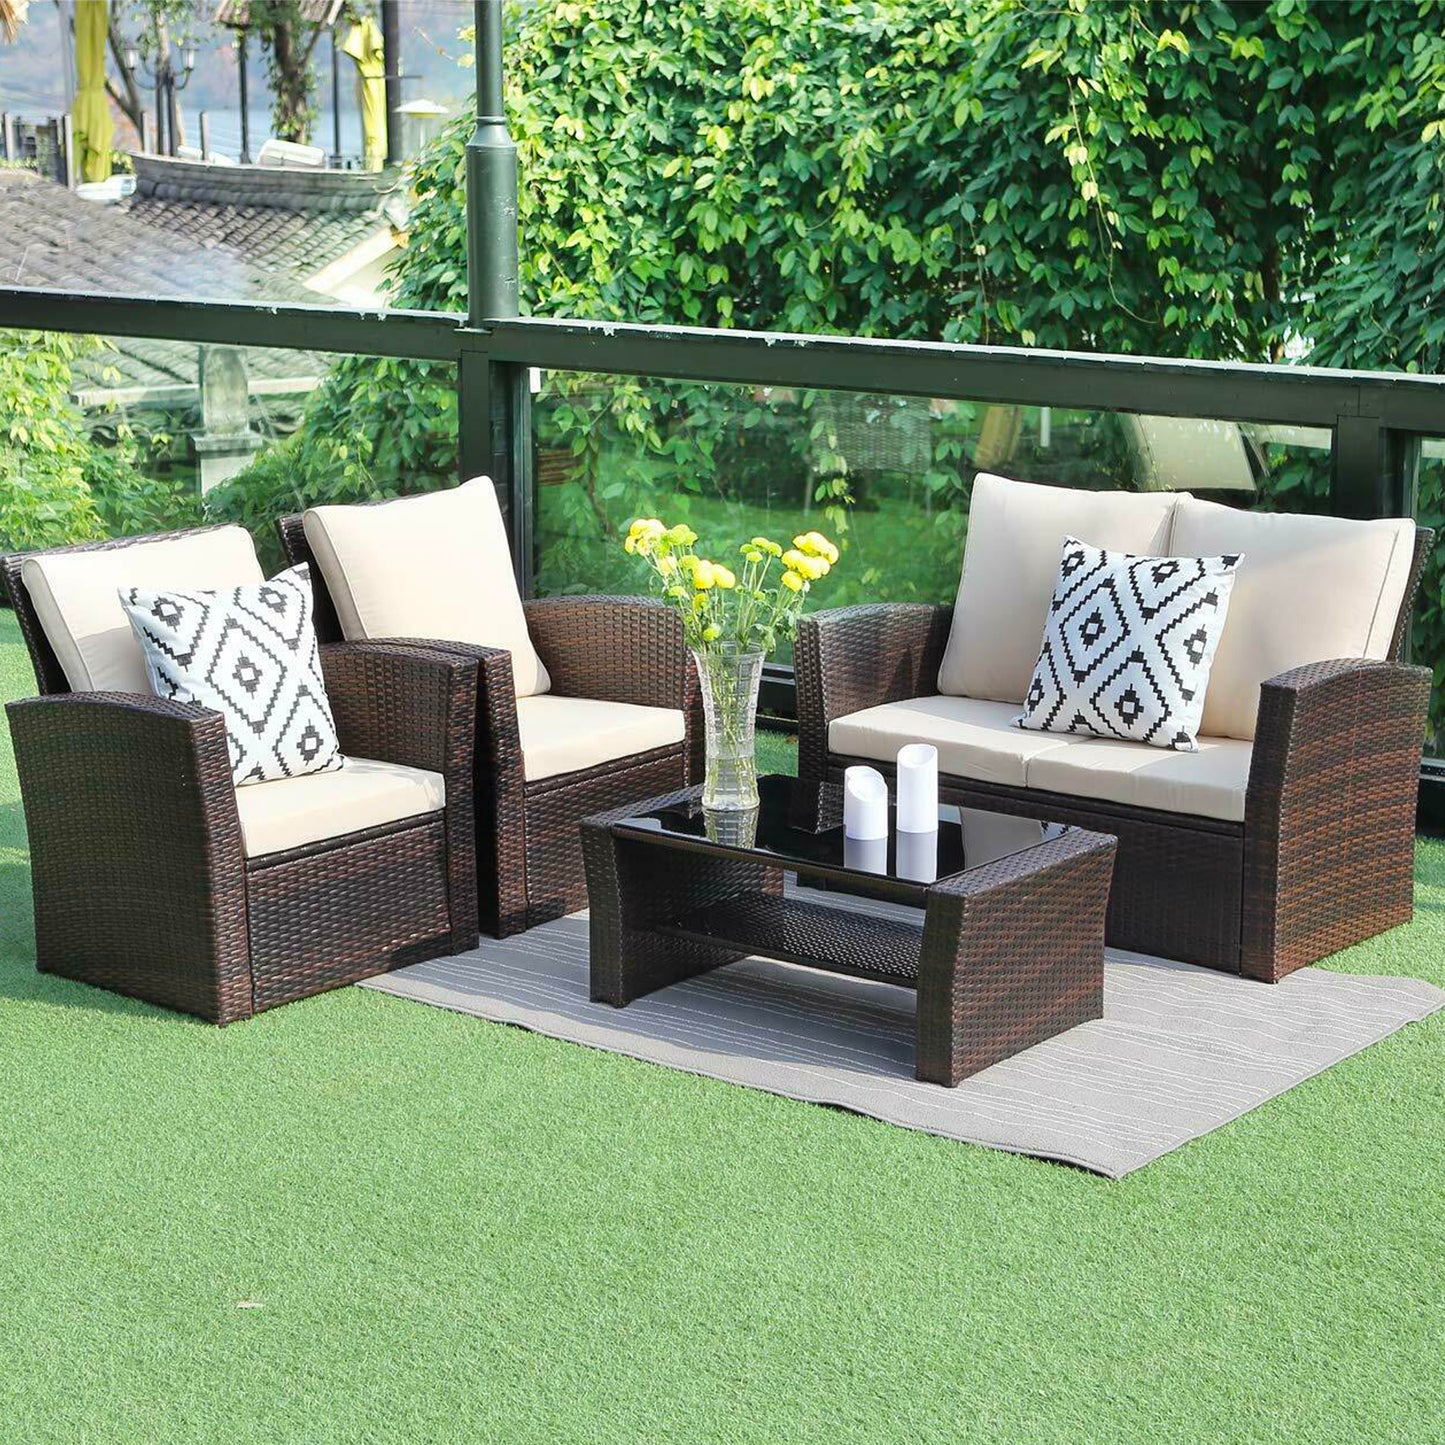 Brown Rattan Garden Furniture with Two Chairs, Sofa and Table